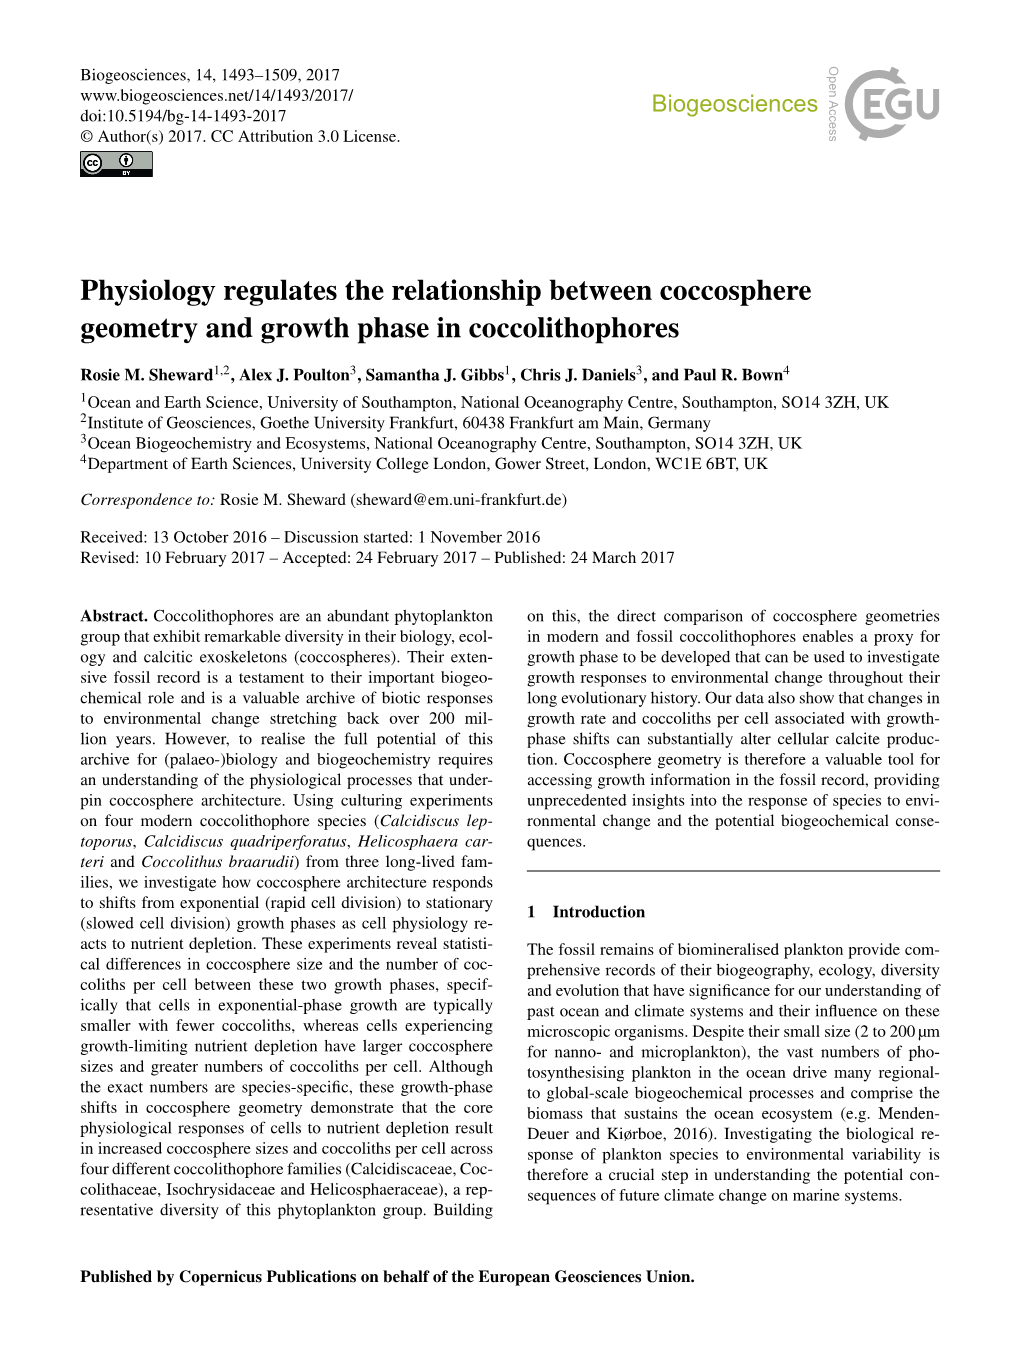 Physiology Regulates the Relationship Between Coccosphere Geometry and Growth Phase in Coccolithophores